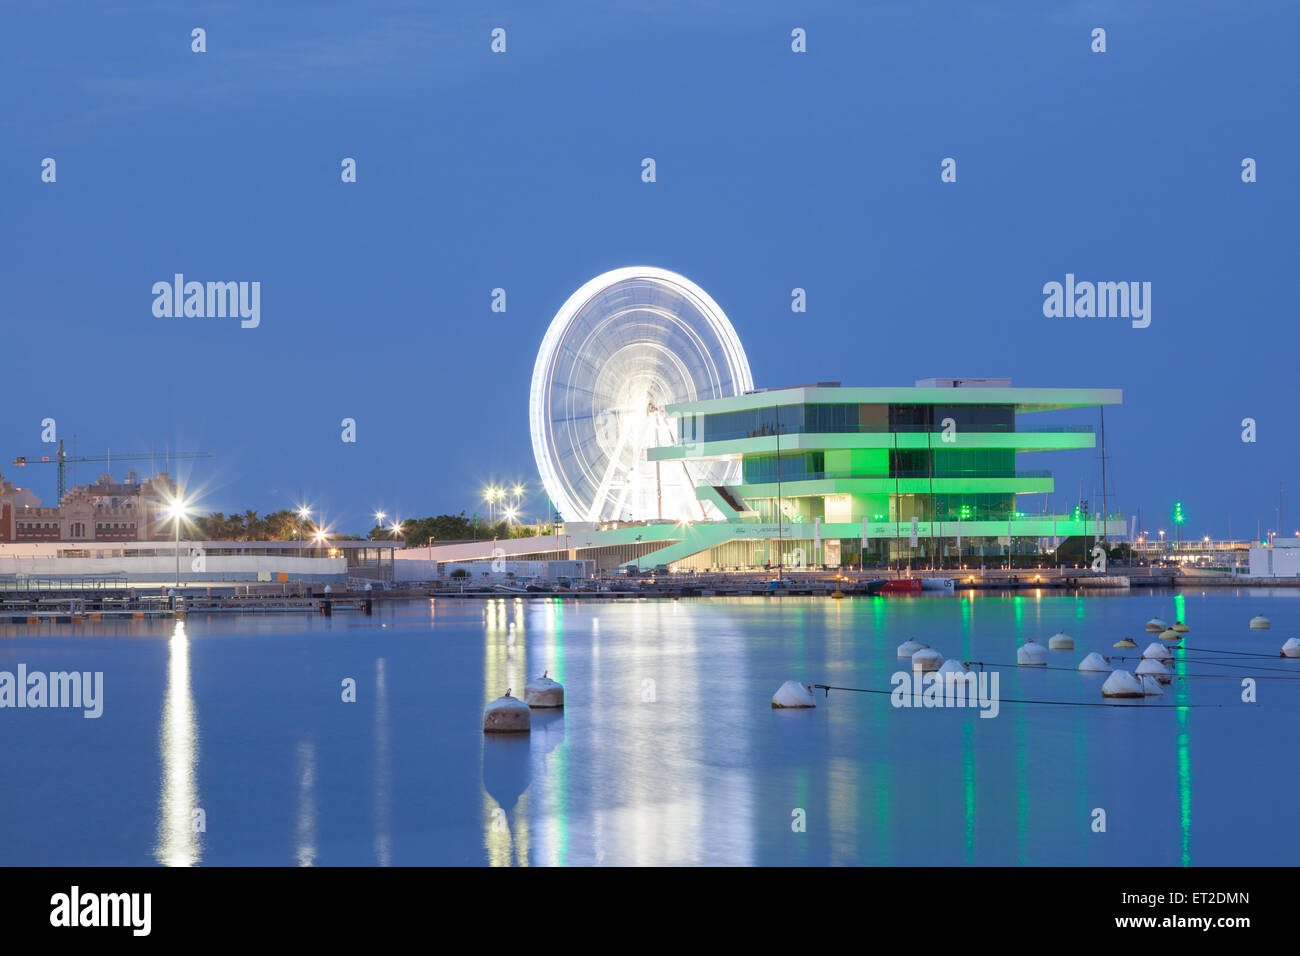 Americas Cup building and Ferris Wheel in the port of Valencia illuminated at night Stock Photo